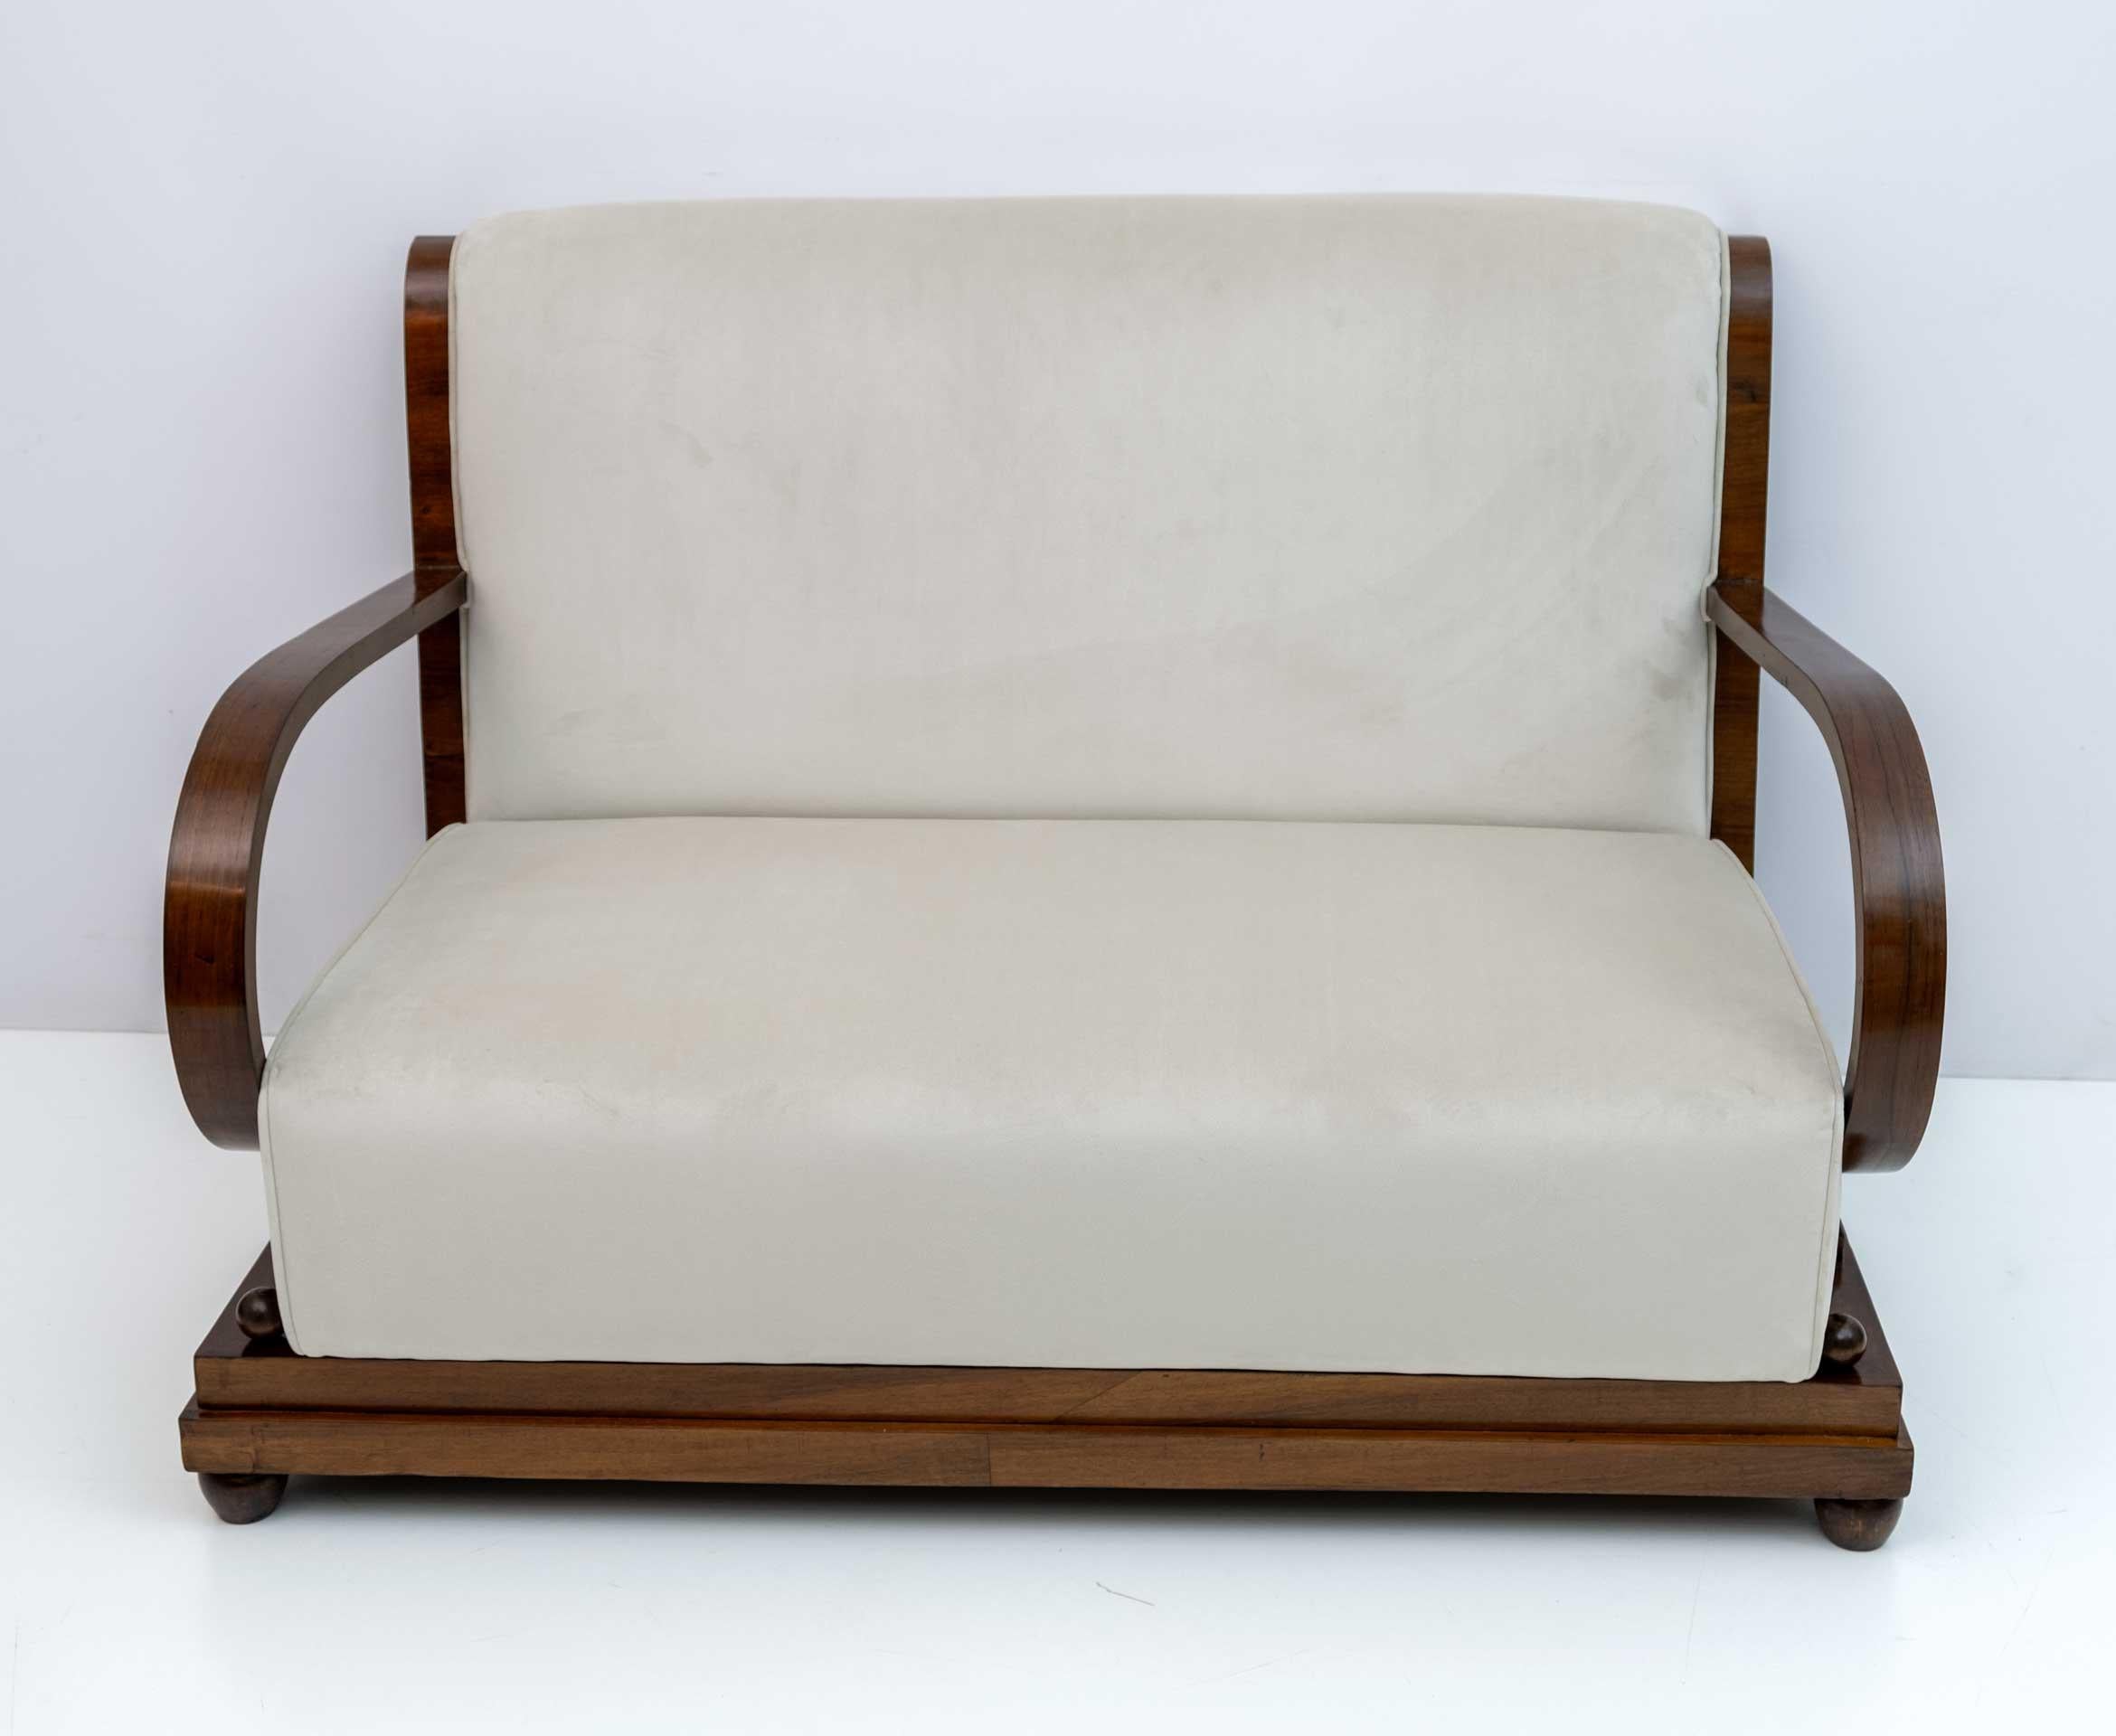 Early Art Deco period Northern Italian sofa, in walnut and ivory velvet upholstery, the back of the sofa is gracefully curved and extends to accentuate the curvature of the sloping armrests. Recently reupholstered and restored with shellac polish. A